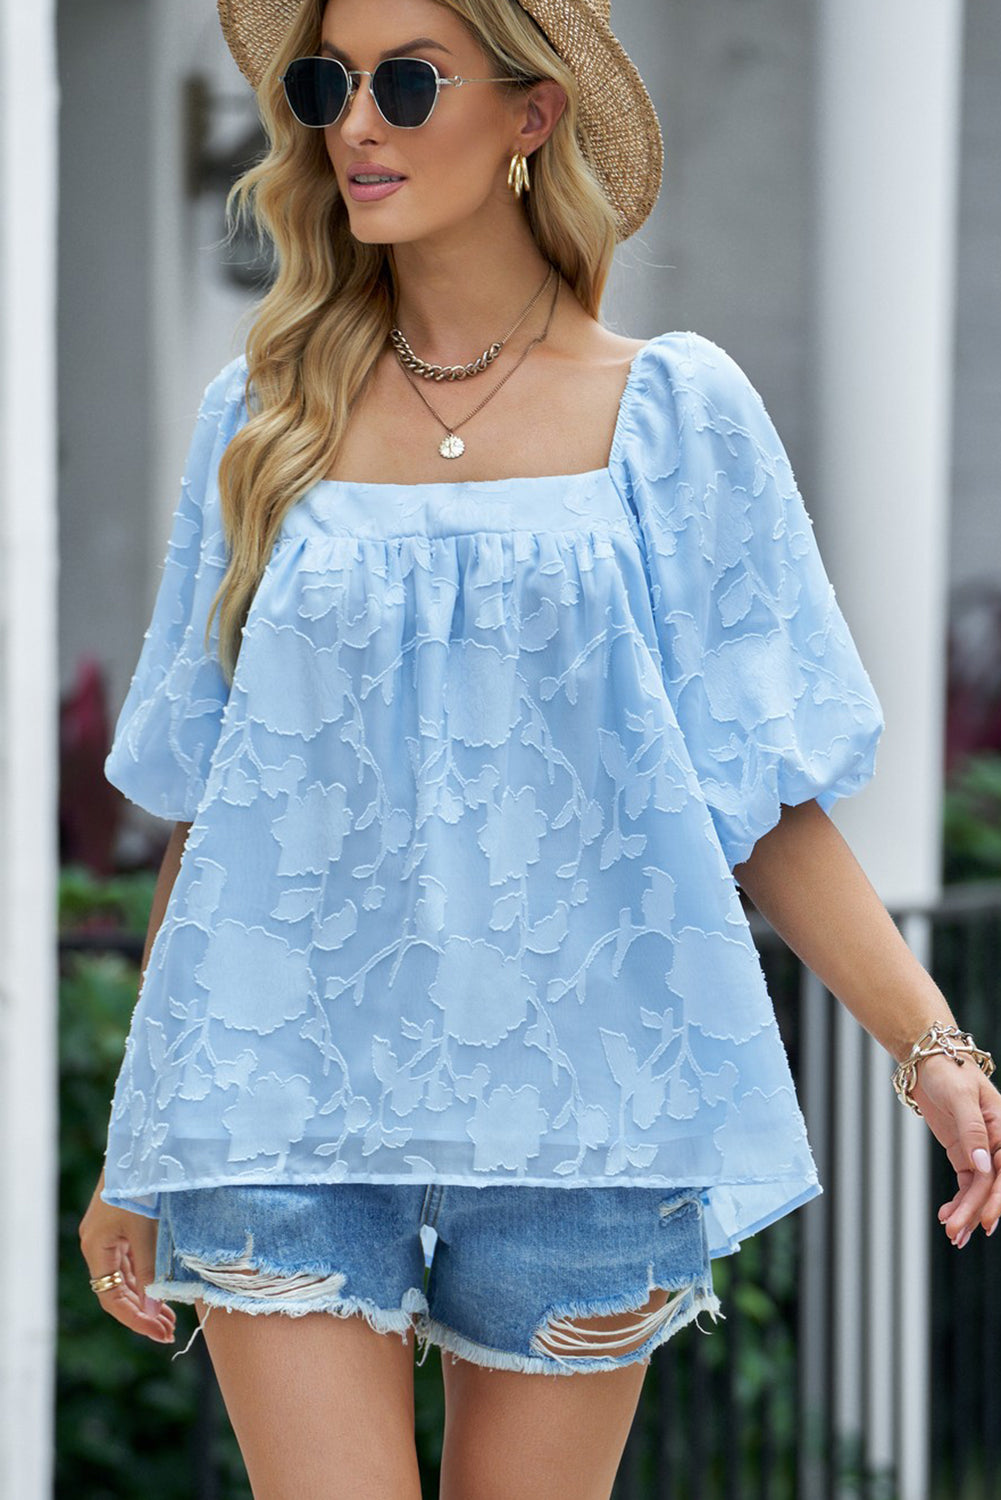 Choosy Gal Applique Puff Sleeve Square Neck Blouse